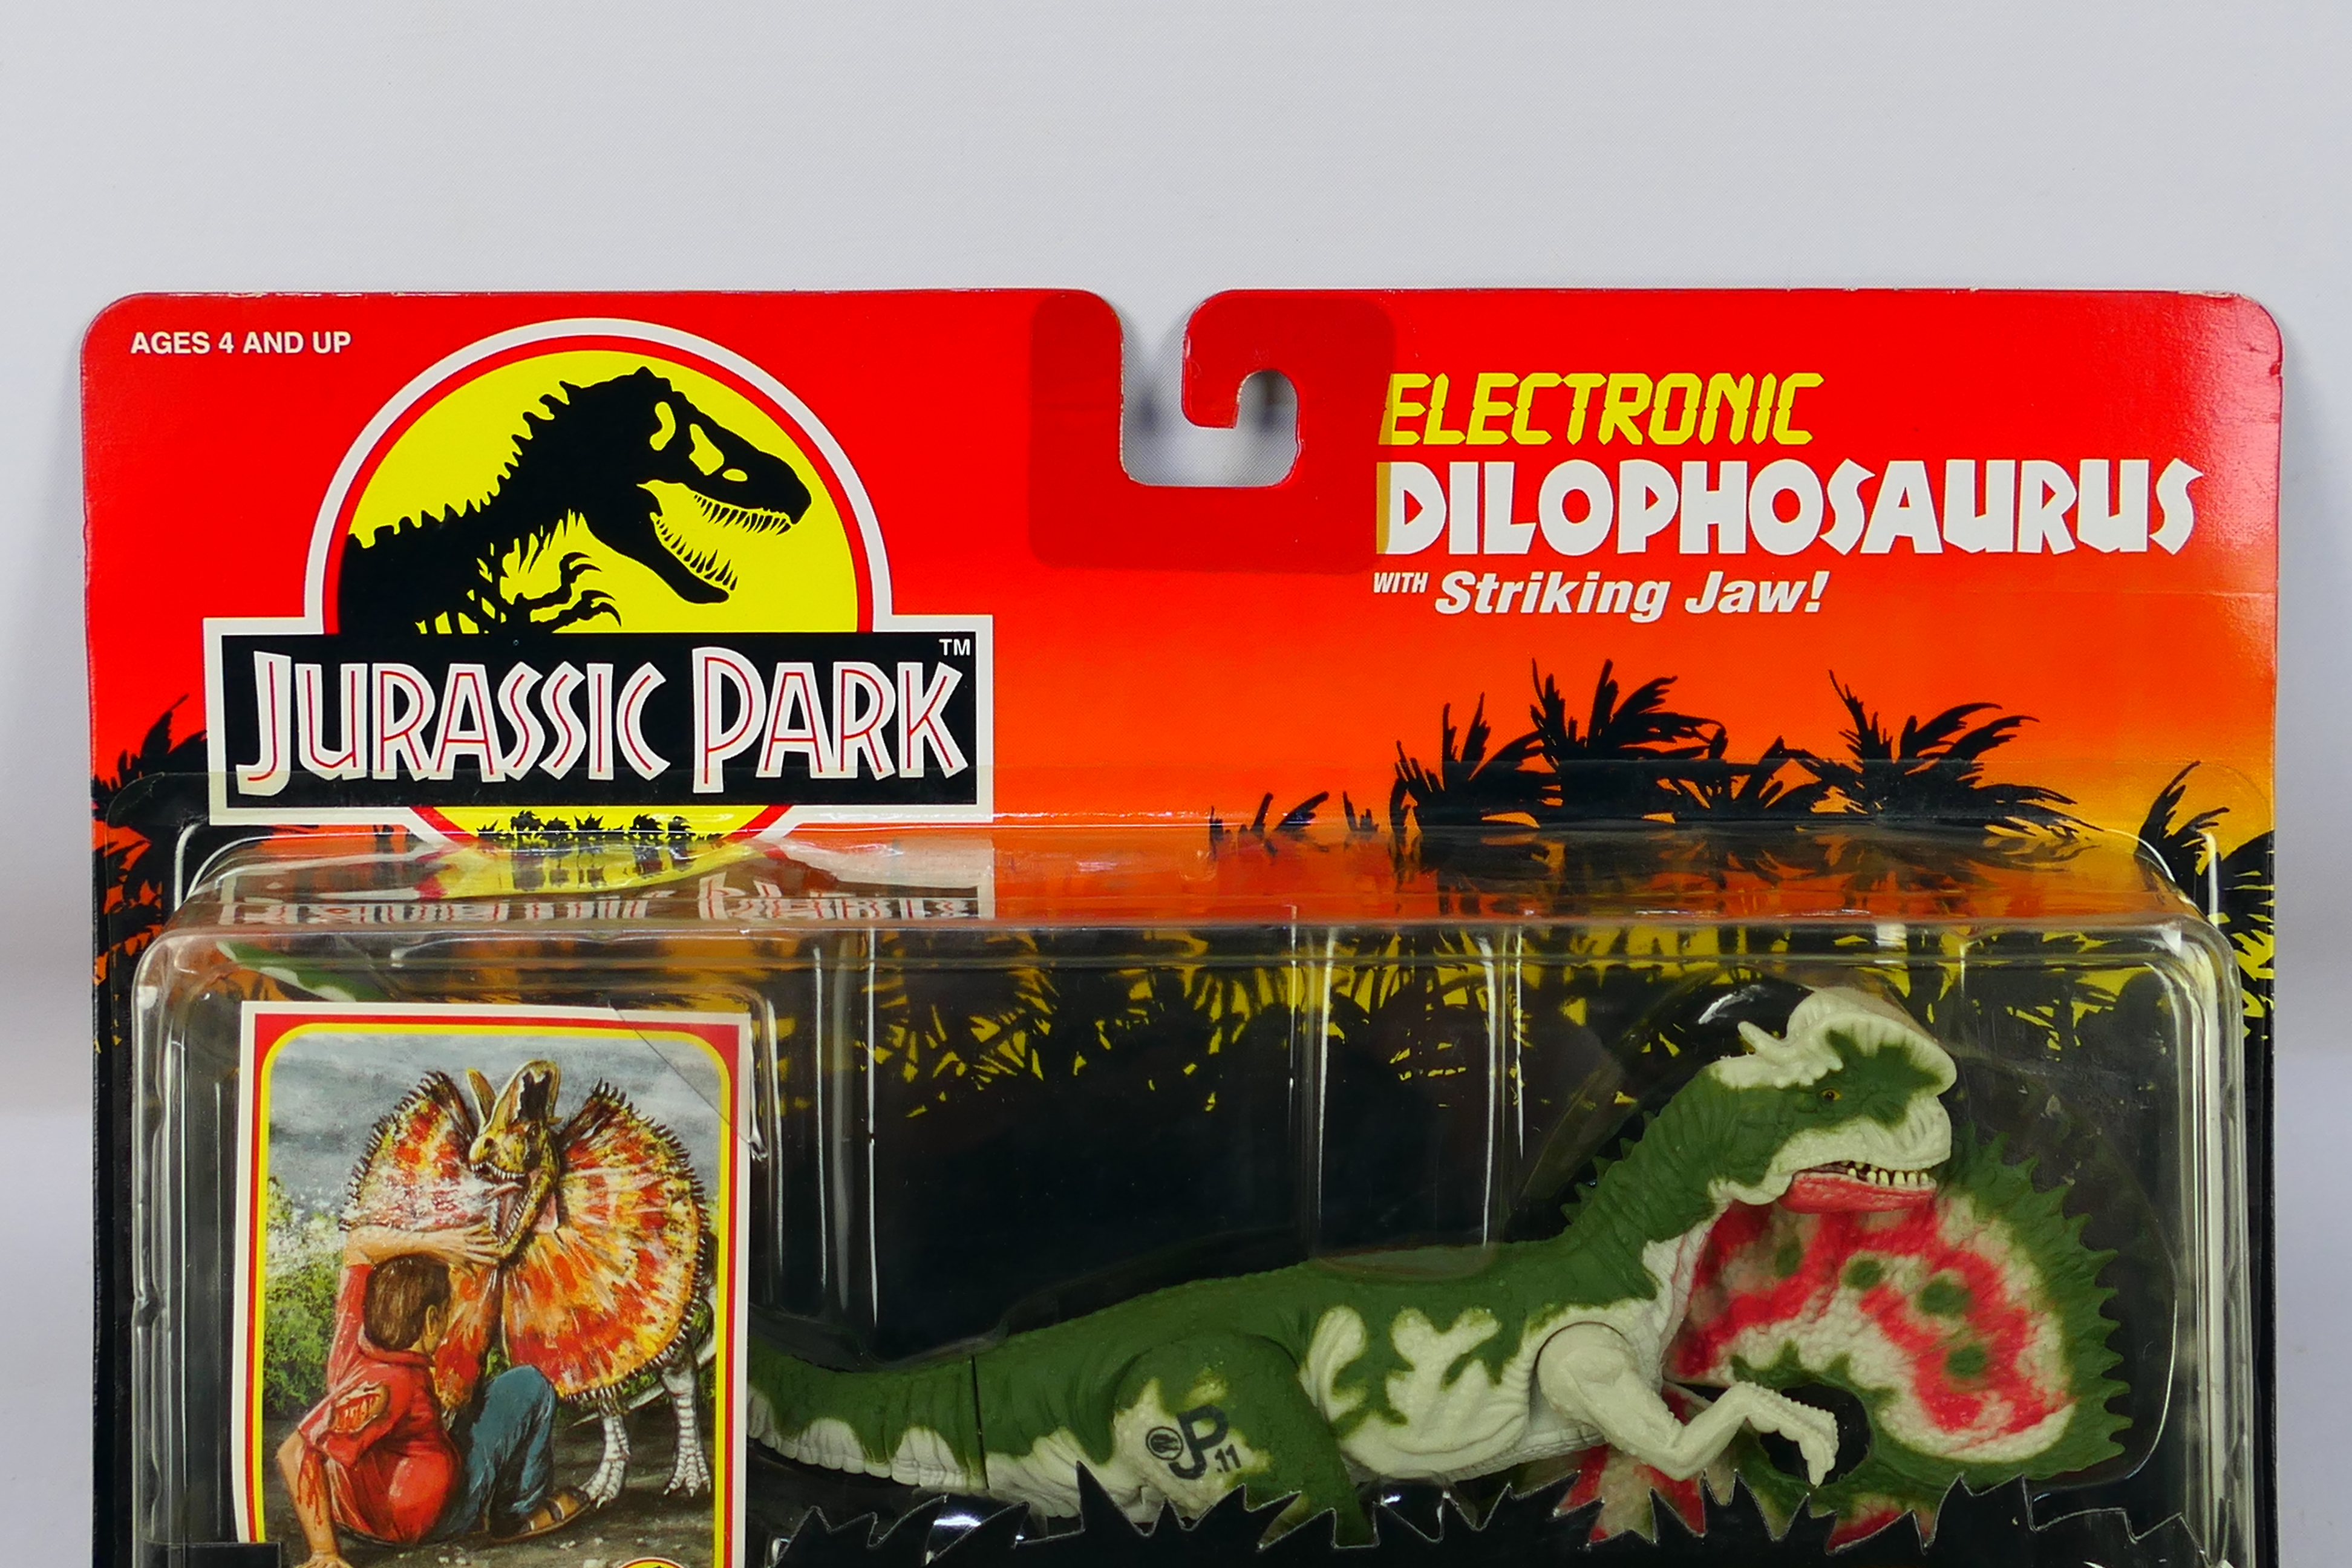 Kenner - Jurassic Park - A 1993 (Series 1) Blister packed figure of Electronic Dilophosaurus with - Image 4 of 6